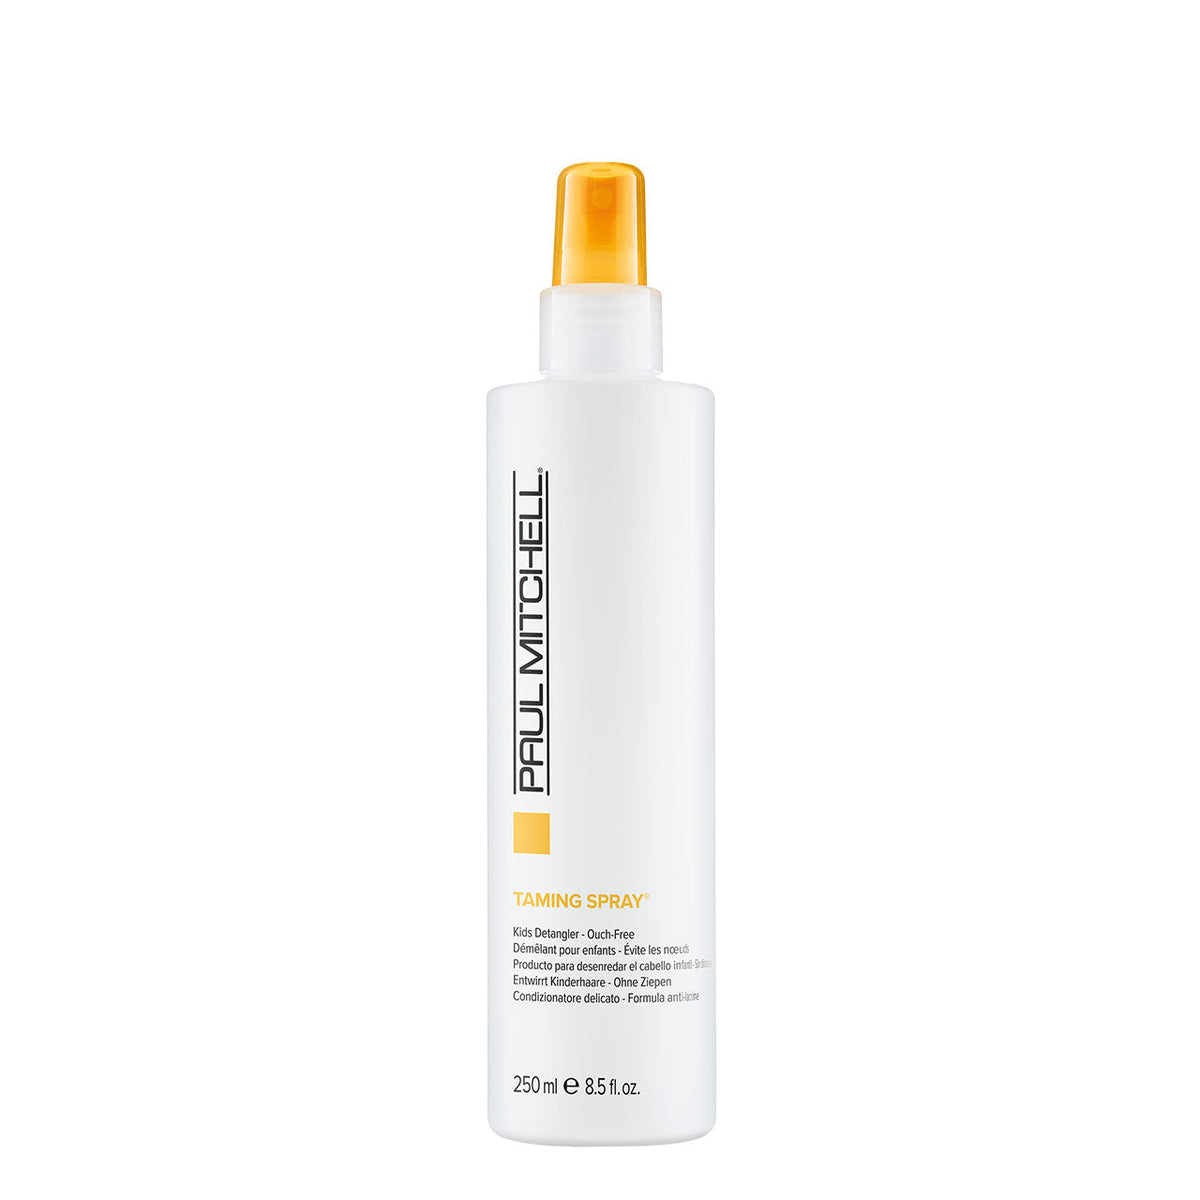 Baby Don't Cry Taming Spray - 250ML - by Paul Mitchell |ProCare Outlet|